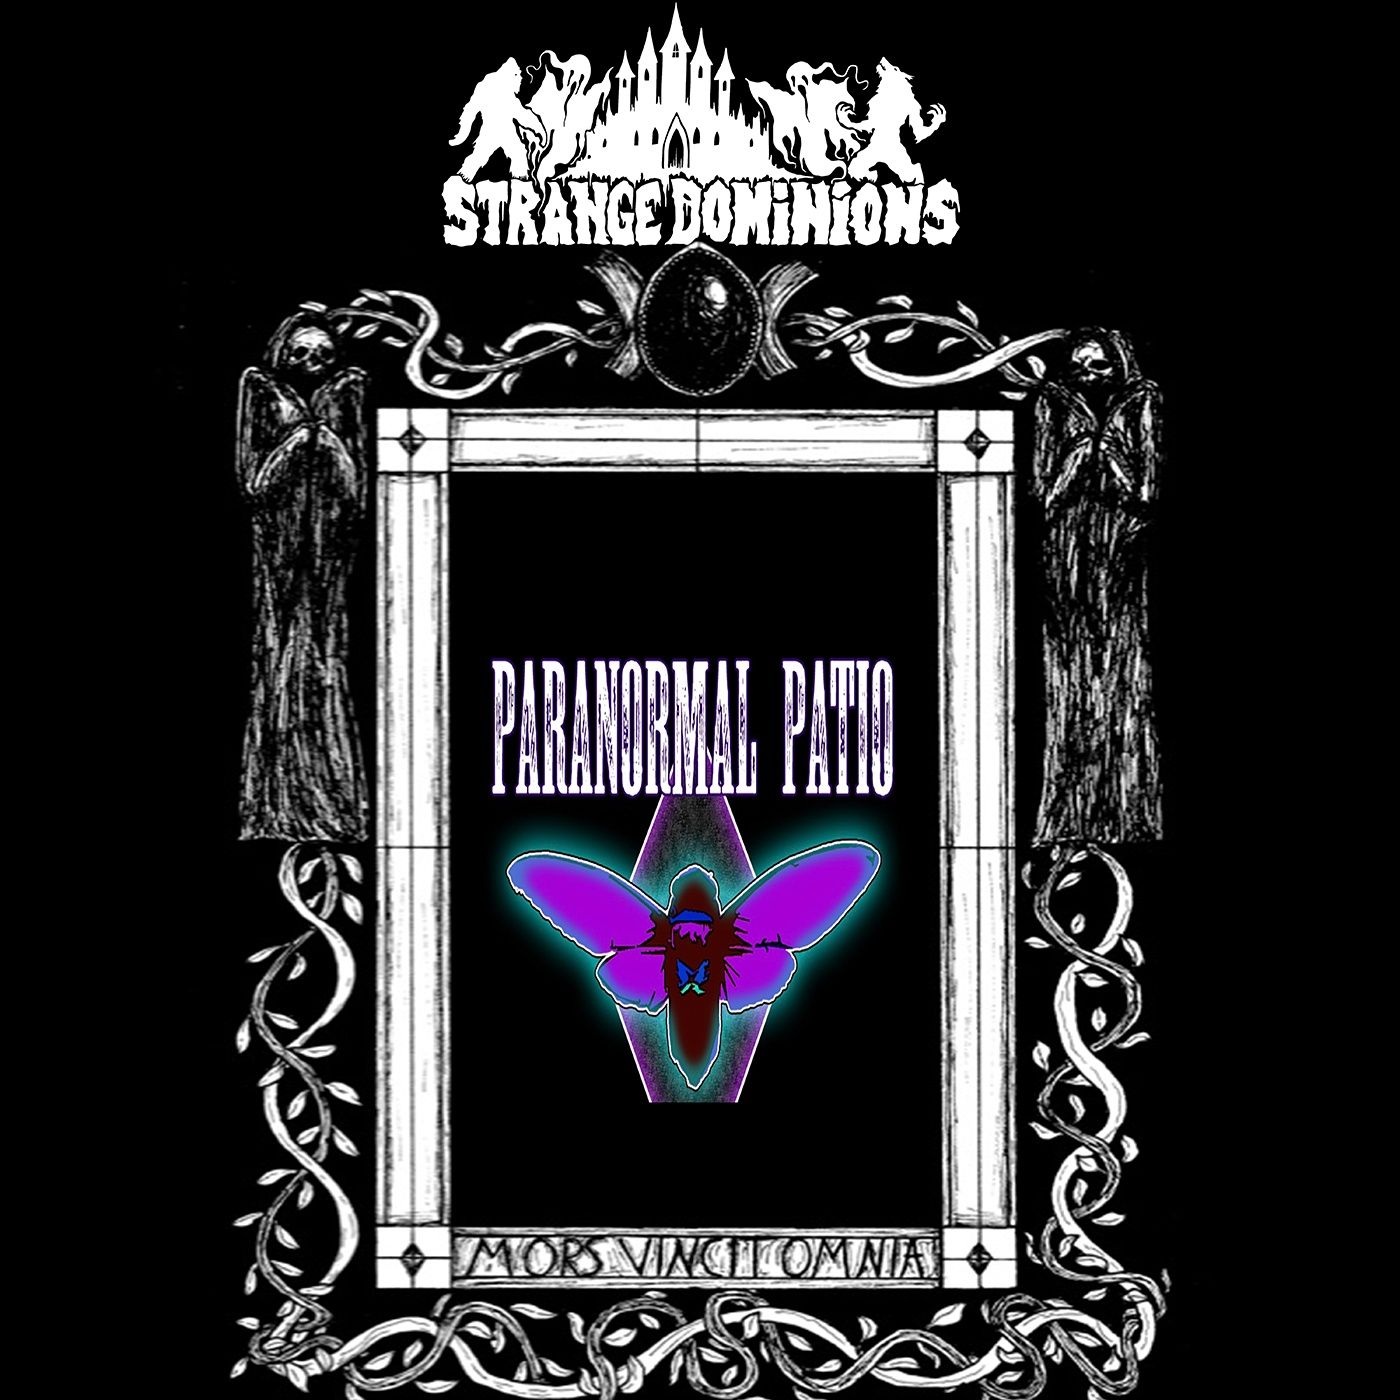 Strange Dominions Episode 17: Exploring the anomalous with Jason Andrews From Paranormal Patio Podcast Image